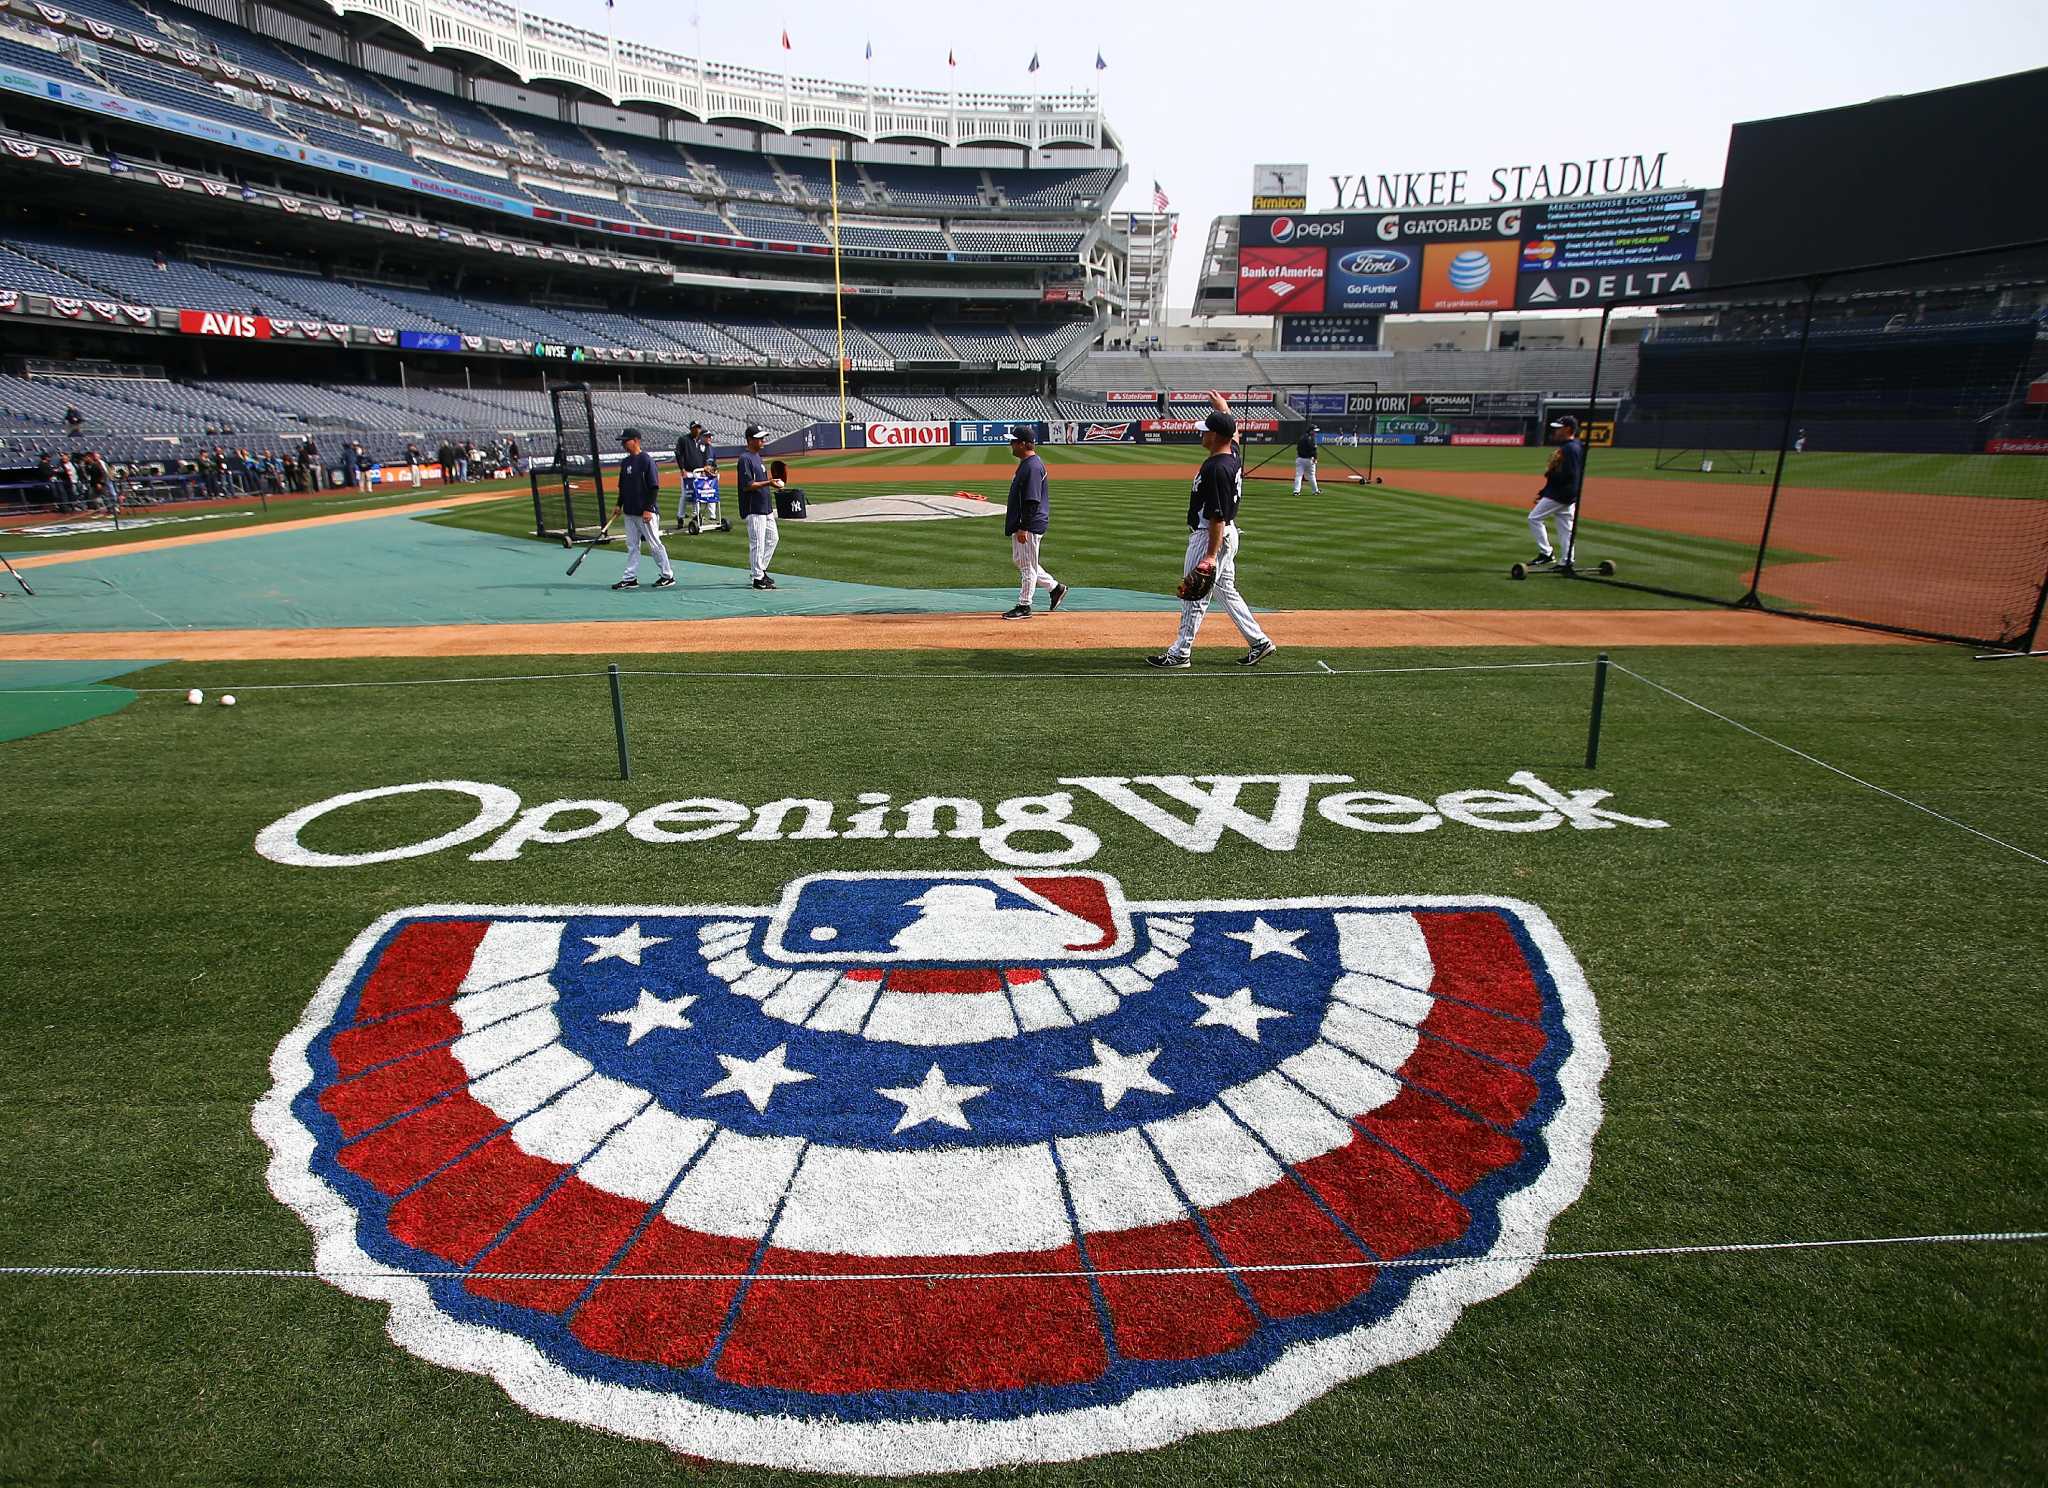 Red Sox, Yankees to honor Newtown on opening day